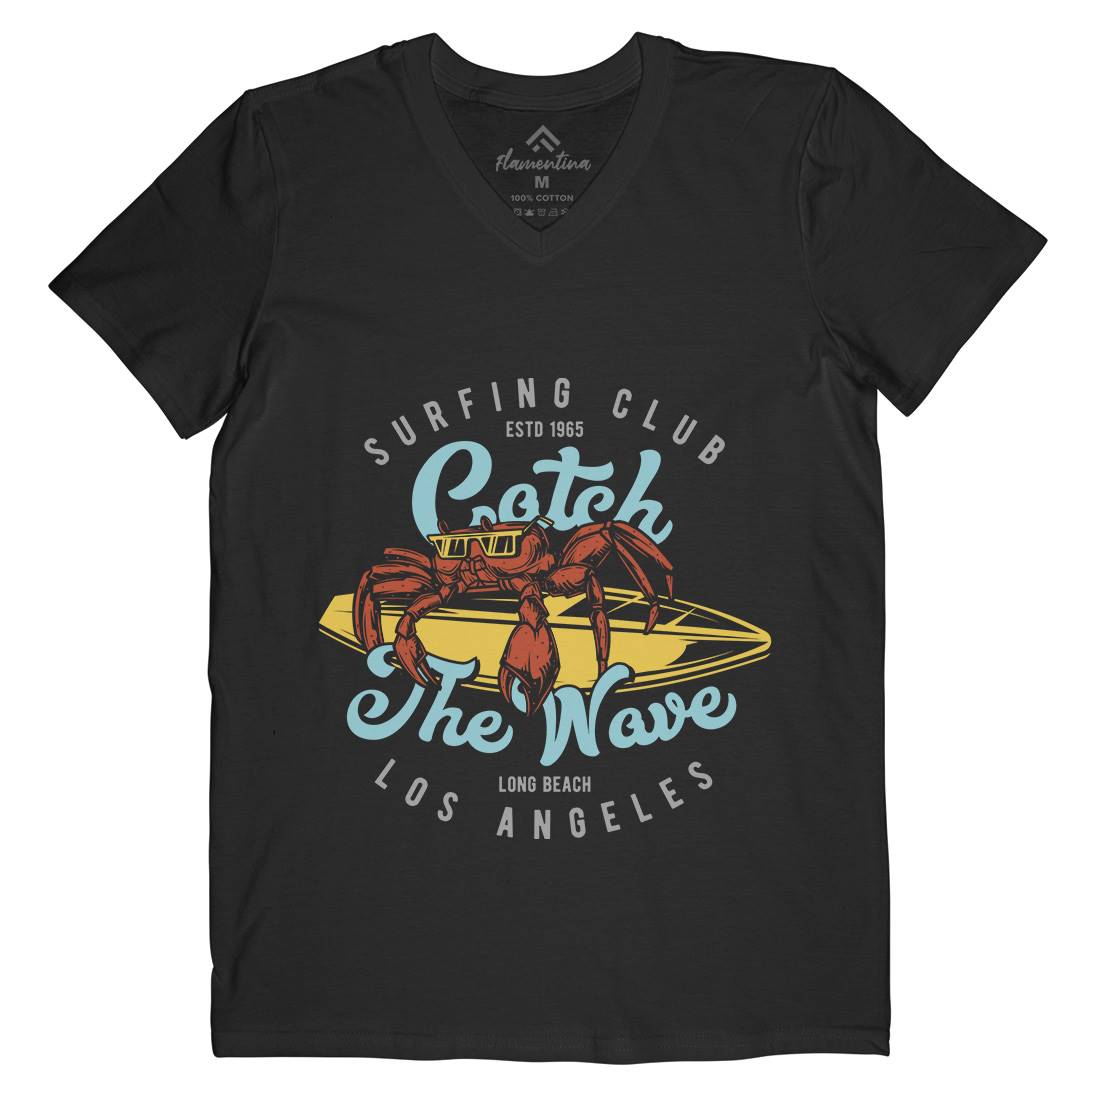 Catch The Wave Surfing Mens V-Neck T-Shirt Surf B877